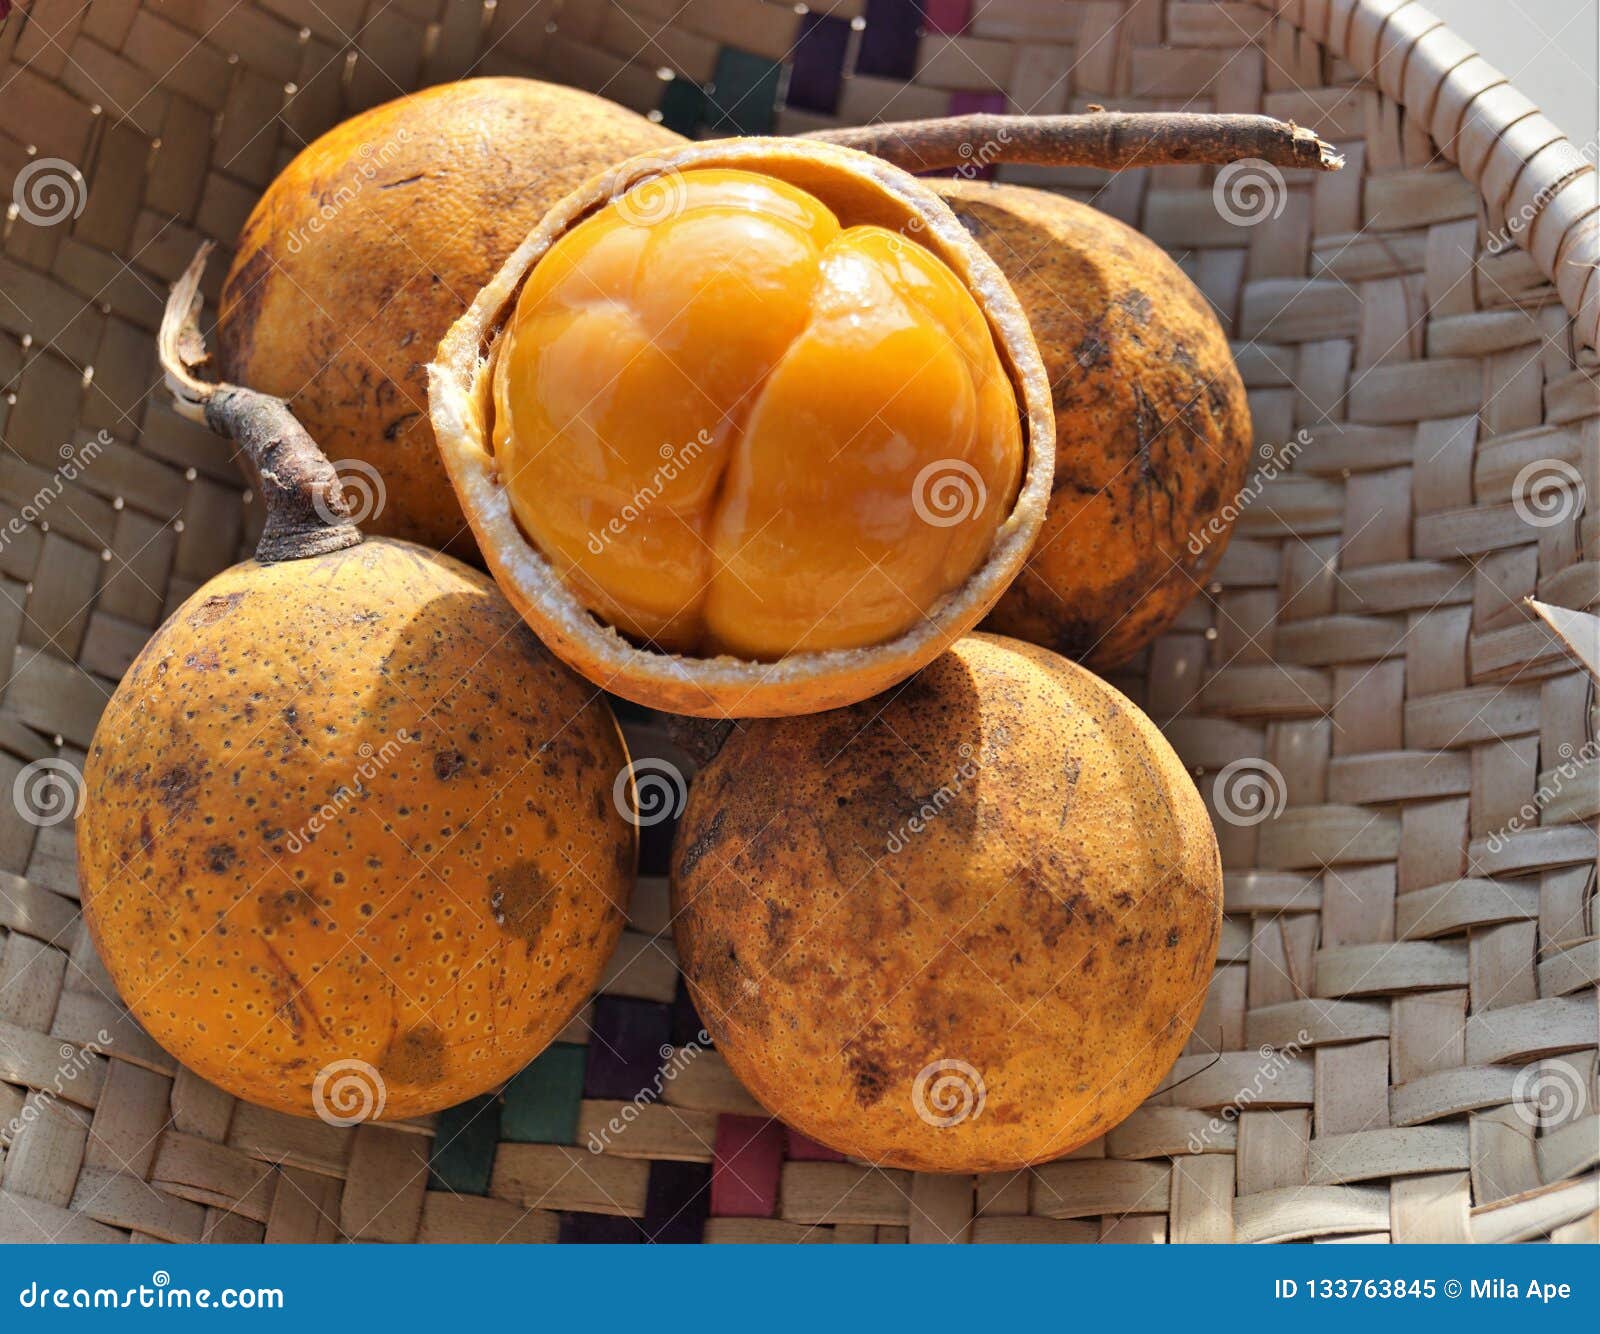 Exotic fruits in africa stock image. Image of agriculture - 133763845